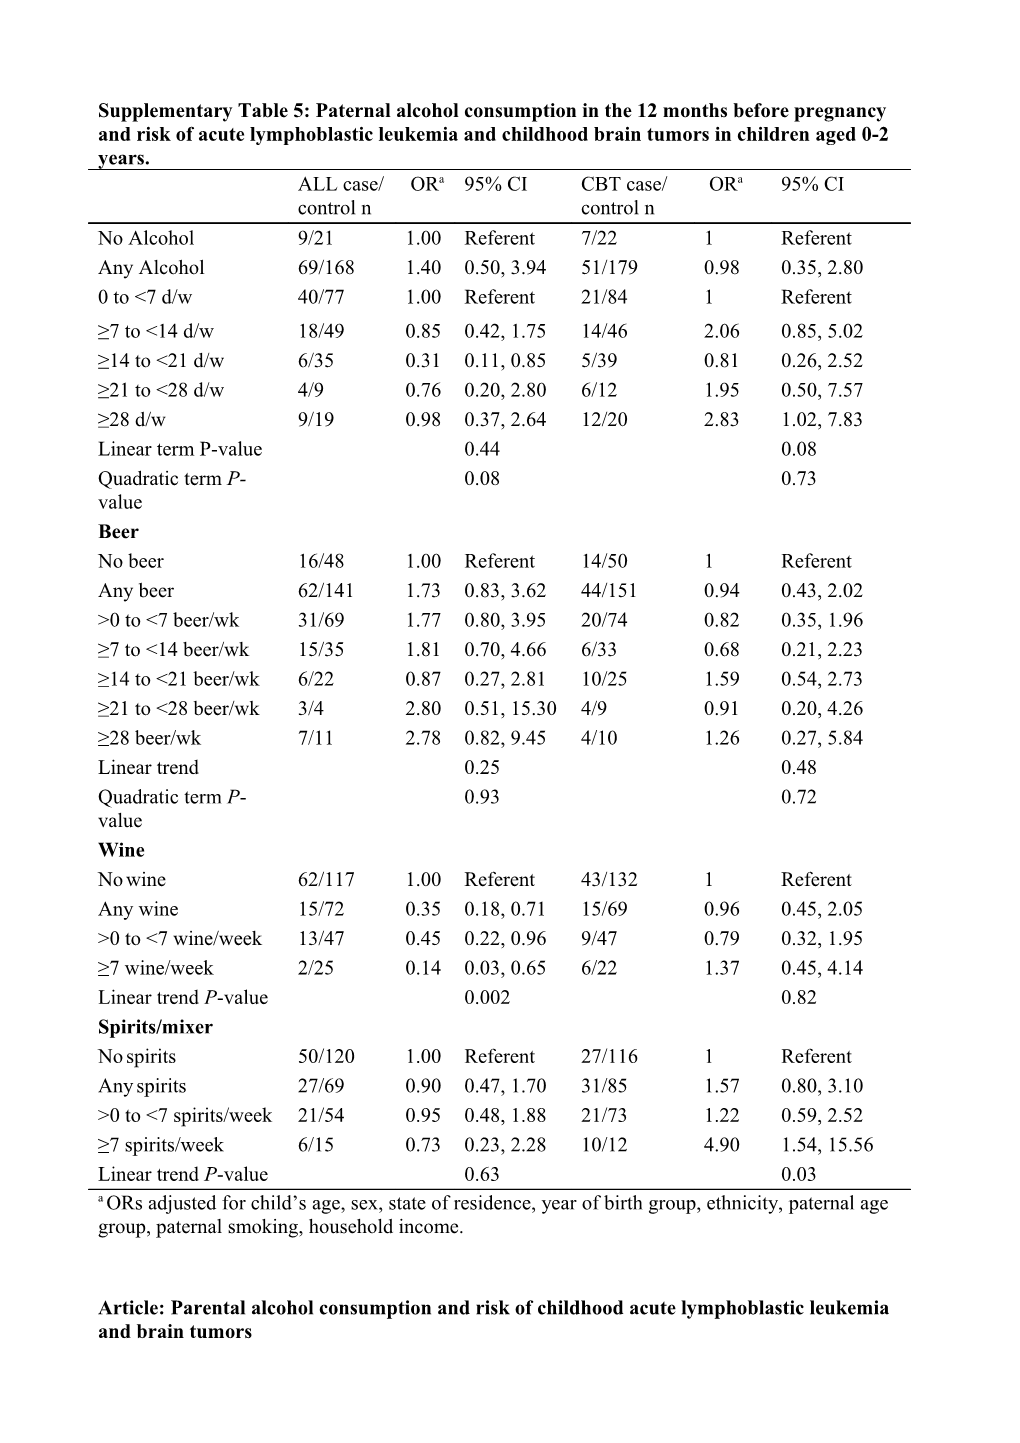 Table Y: Paternal Alcohol Consumption in the 12 Months Before Pregnancy and Risk of Acute